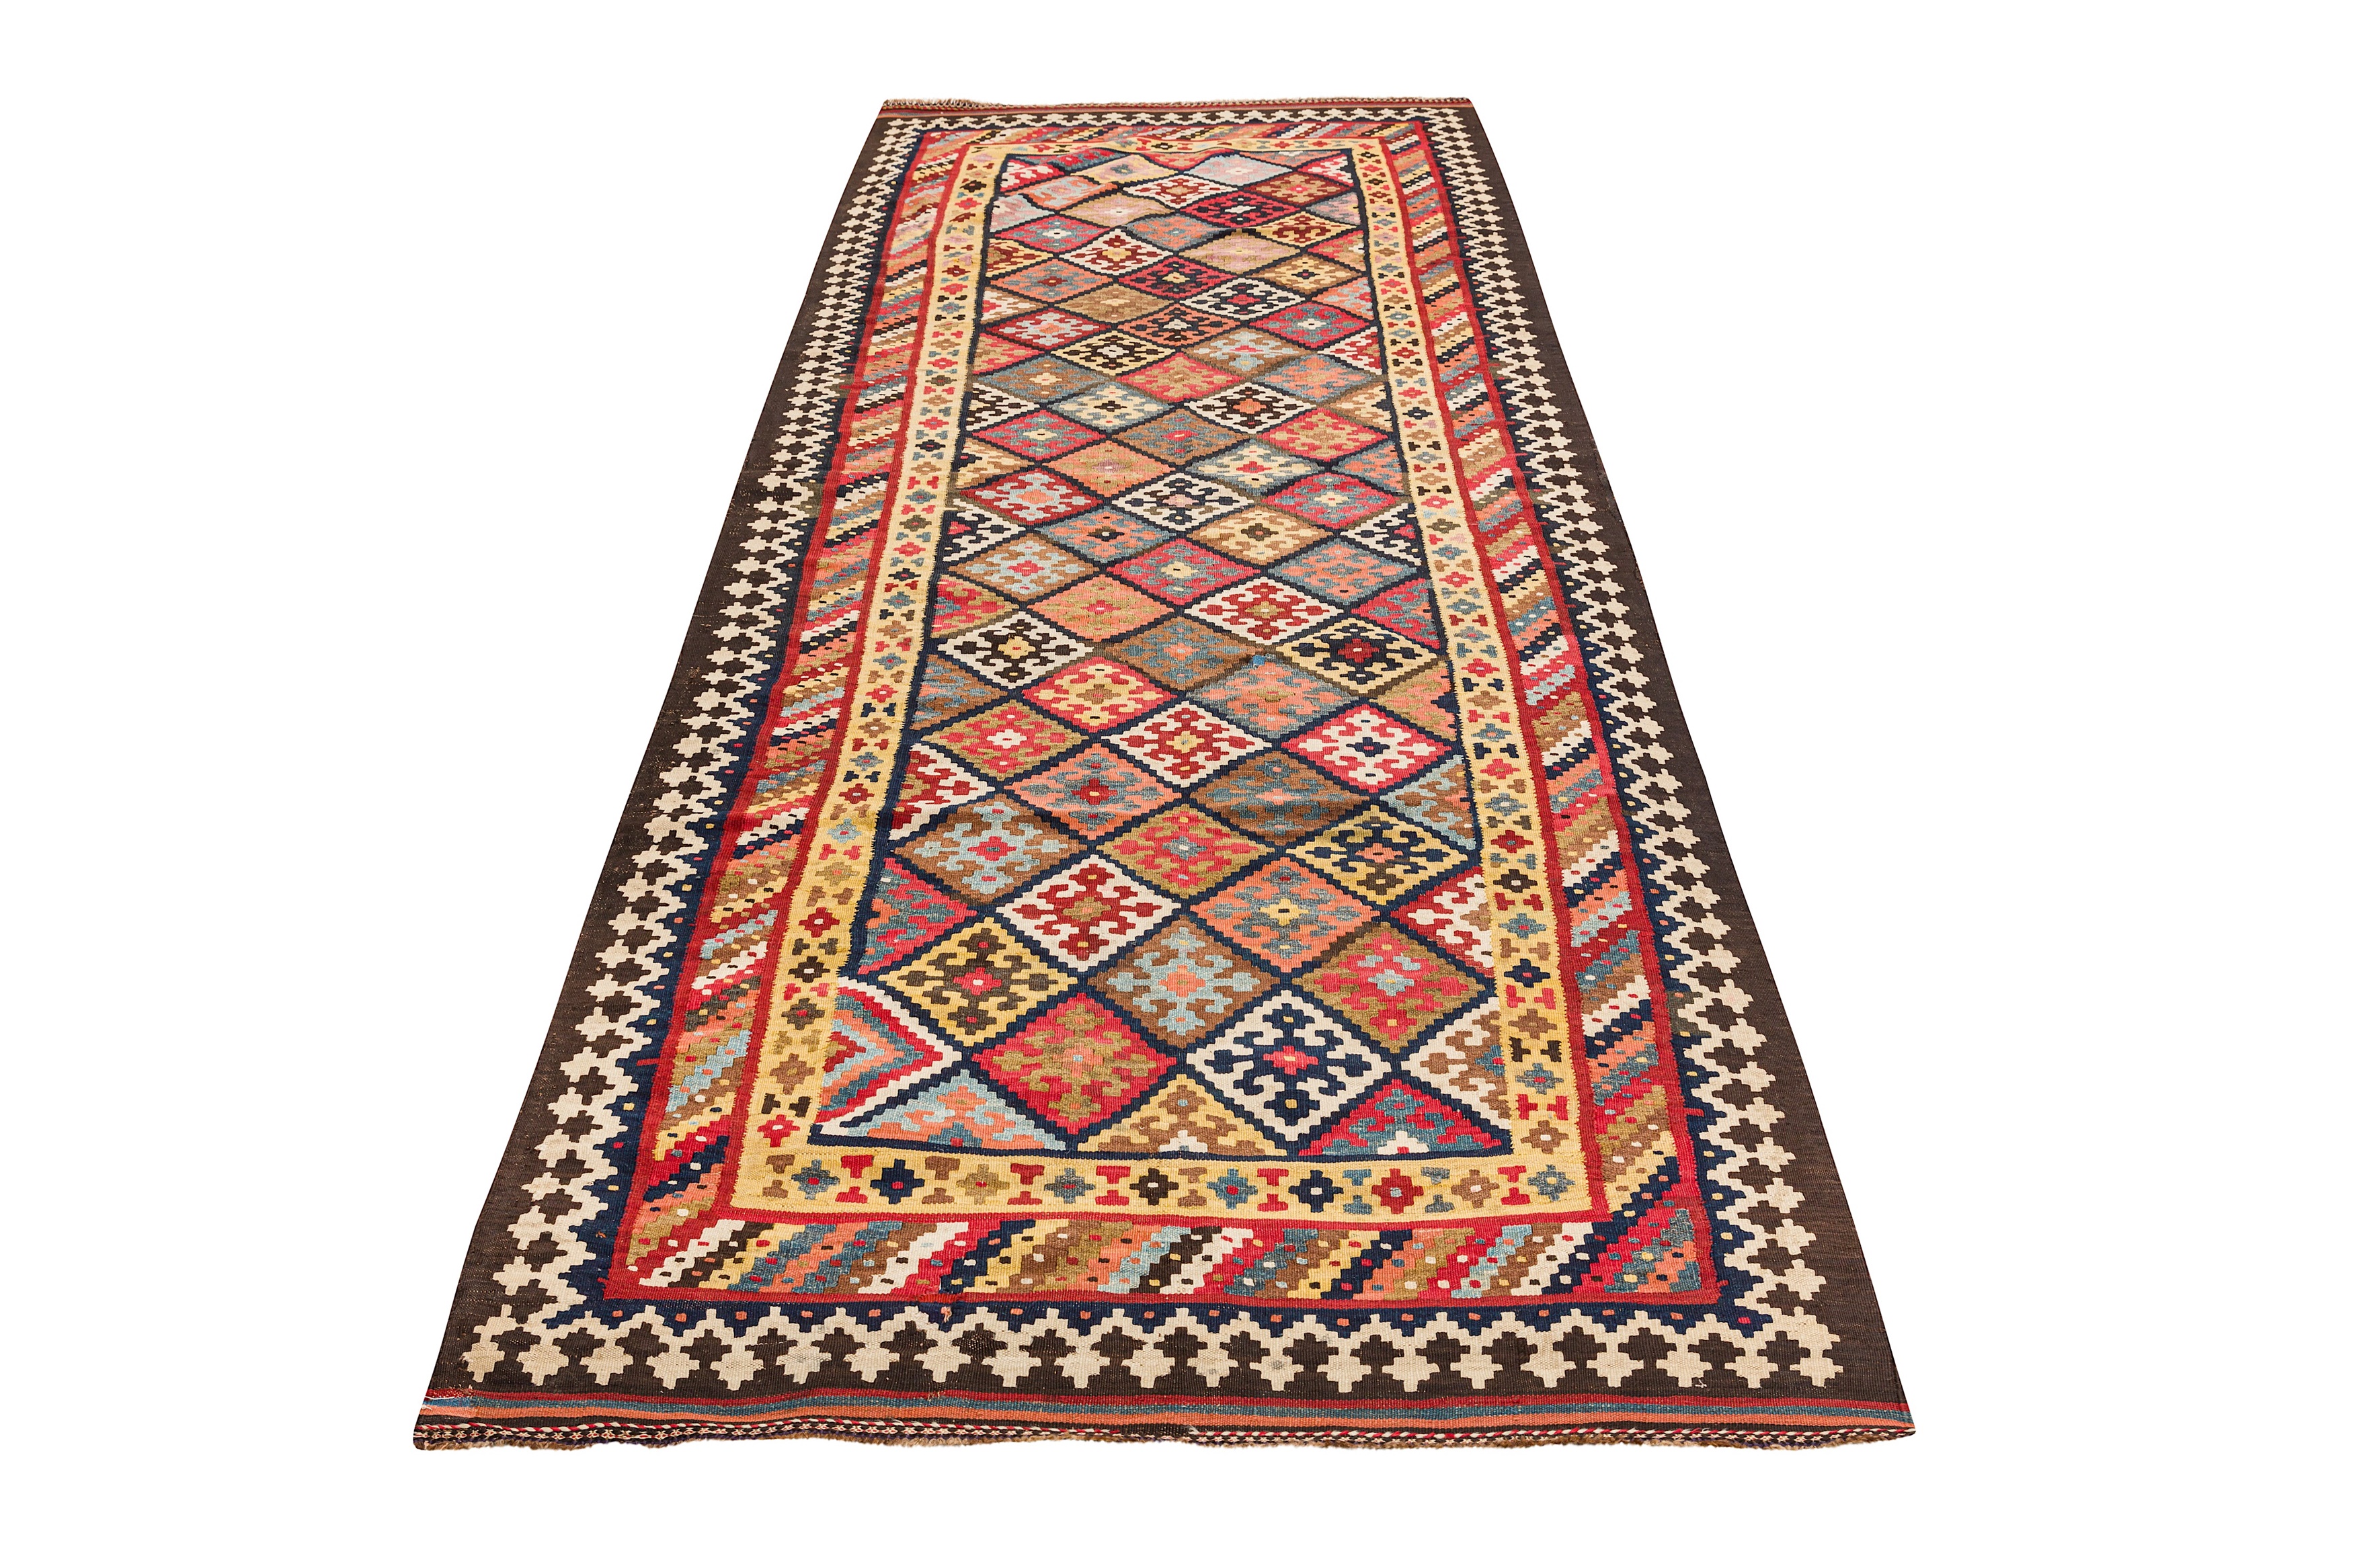 AN ANTIQUE NORTH-WEST PERSIAN KILIM RUNNER - Image 2 of 8